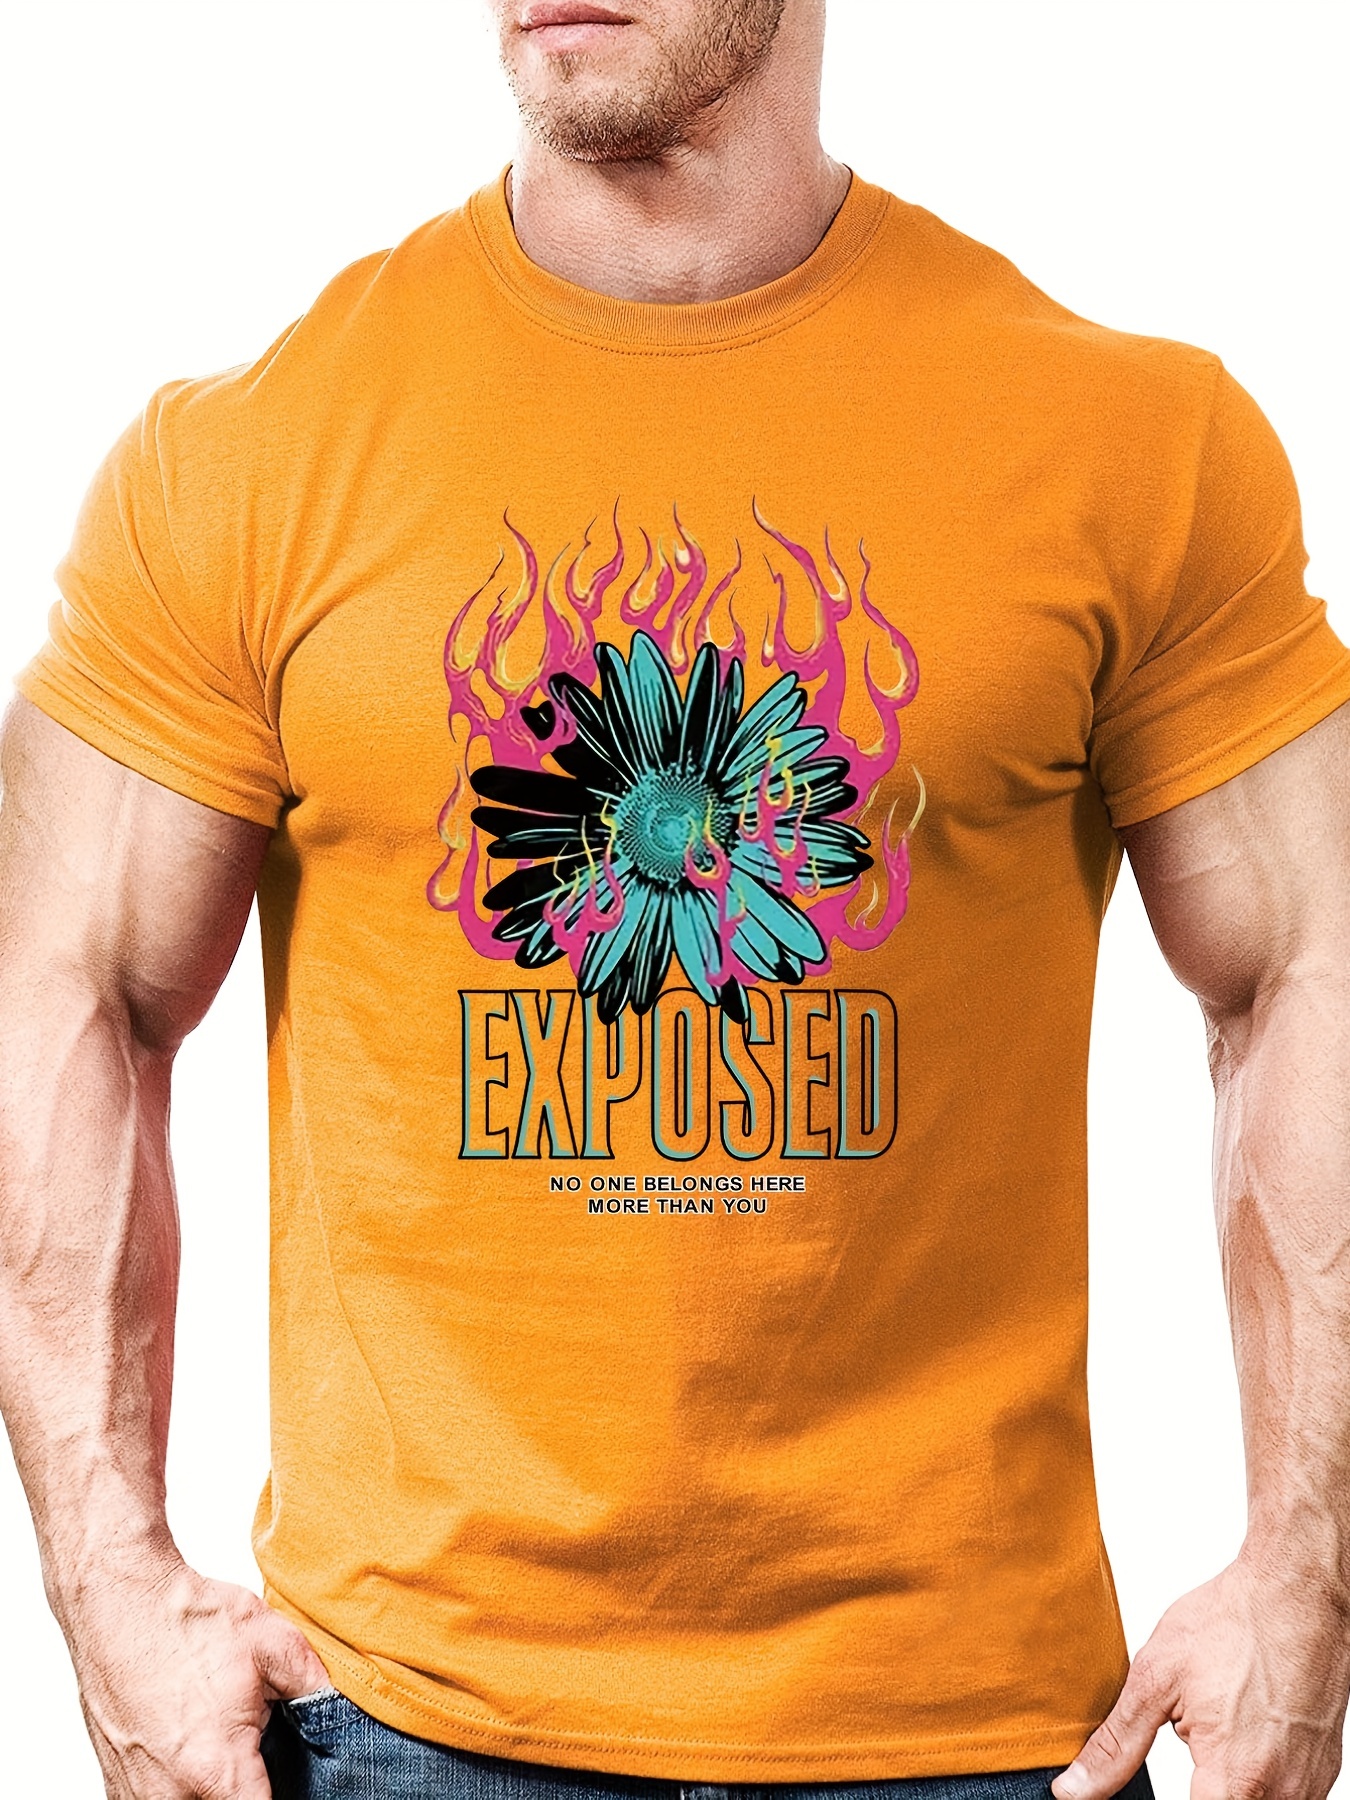 You Can Get It Top - Orange  Graphic tee outfits, Shirt designs